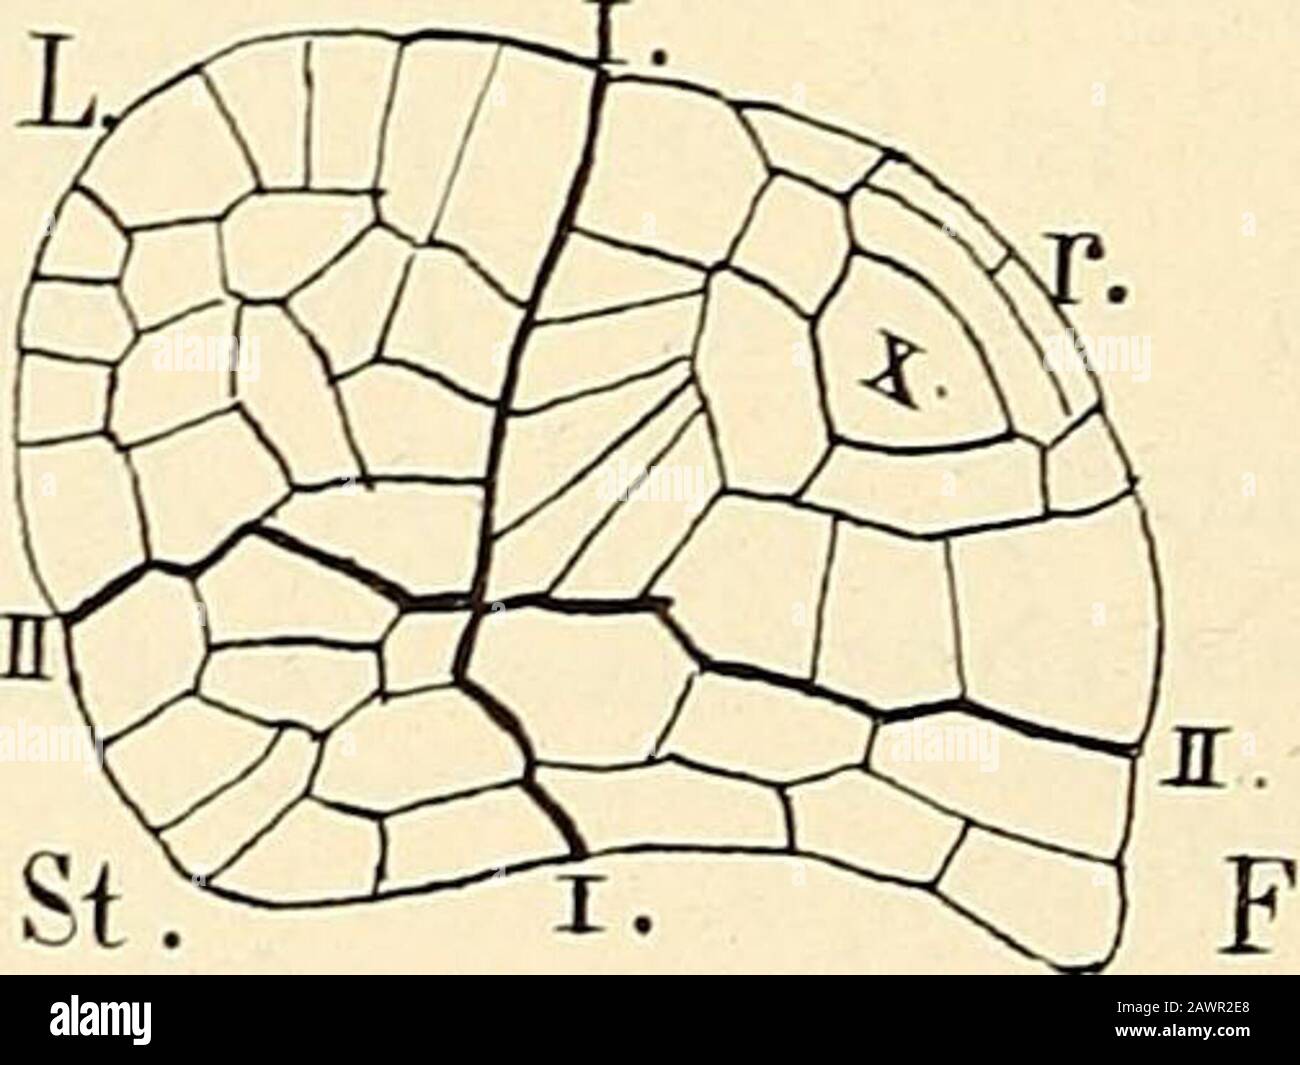 The structure & development of the mosses and ferns (Archegoniatae) . Jig. 212.—Marsilia vestita (Hook and Grev.). Development of the embryo. A, Longitudinalsection of archegonium with two-celled embrjo; B, similar section of a later stage ; C, twotransverse sections of a young embryo ; D, two longitudinal sections of an older one; I, I, thebasal wall; L, cotyledon ; st, stem; r, root ; F, foot. A-C, X 525 ; D, X260. the changes are the same as those described in Marattia andOsmunda. Coincident with the first divisions in the embryo, eachof the lateral cells of the prothallium (venter) divides Stock Photo